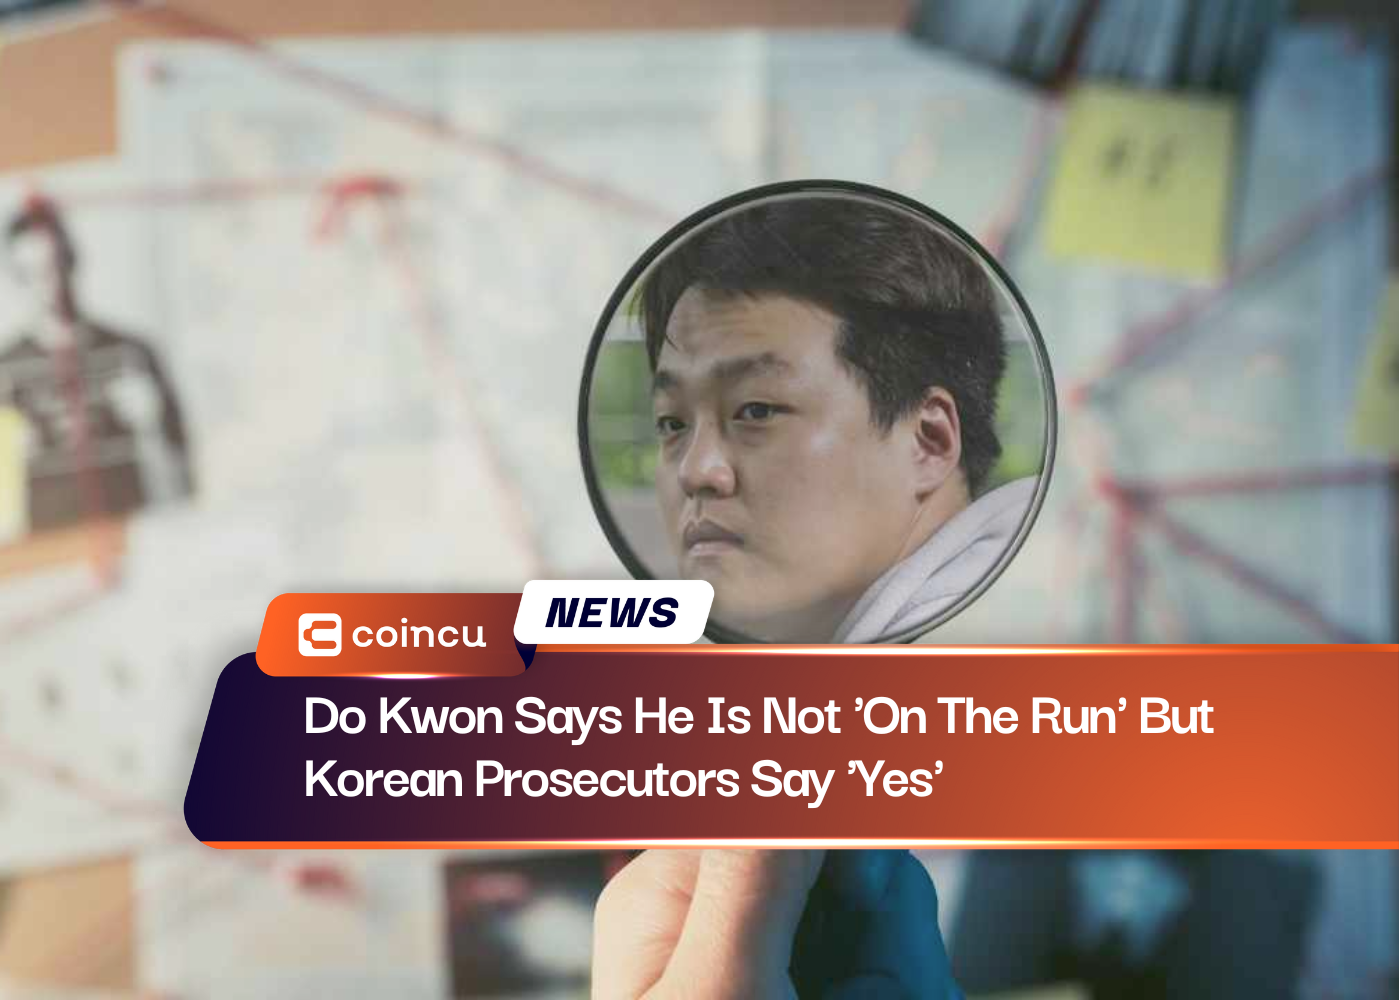 Do Kwon Says He Is Not 'On The Run' But Korean Prosecutors Say 'Yes'